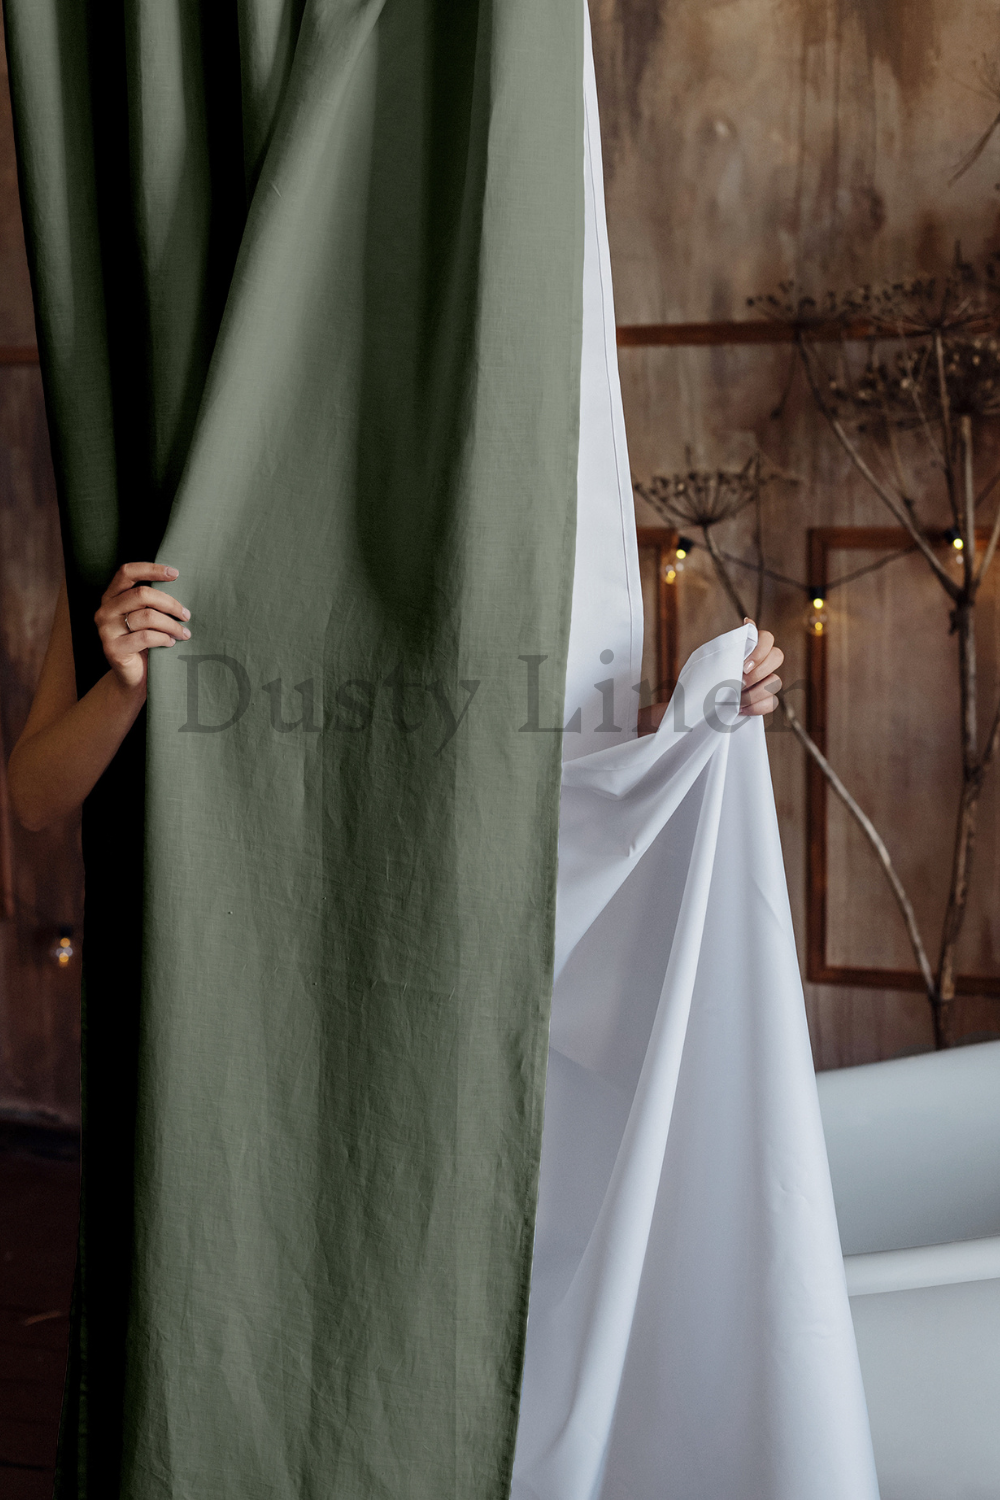 Rustic style a bathroom with a bathtub and a elegant shower curtain in green color